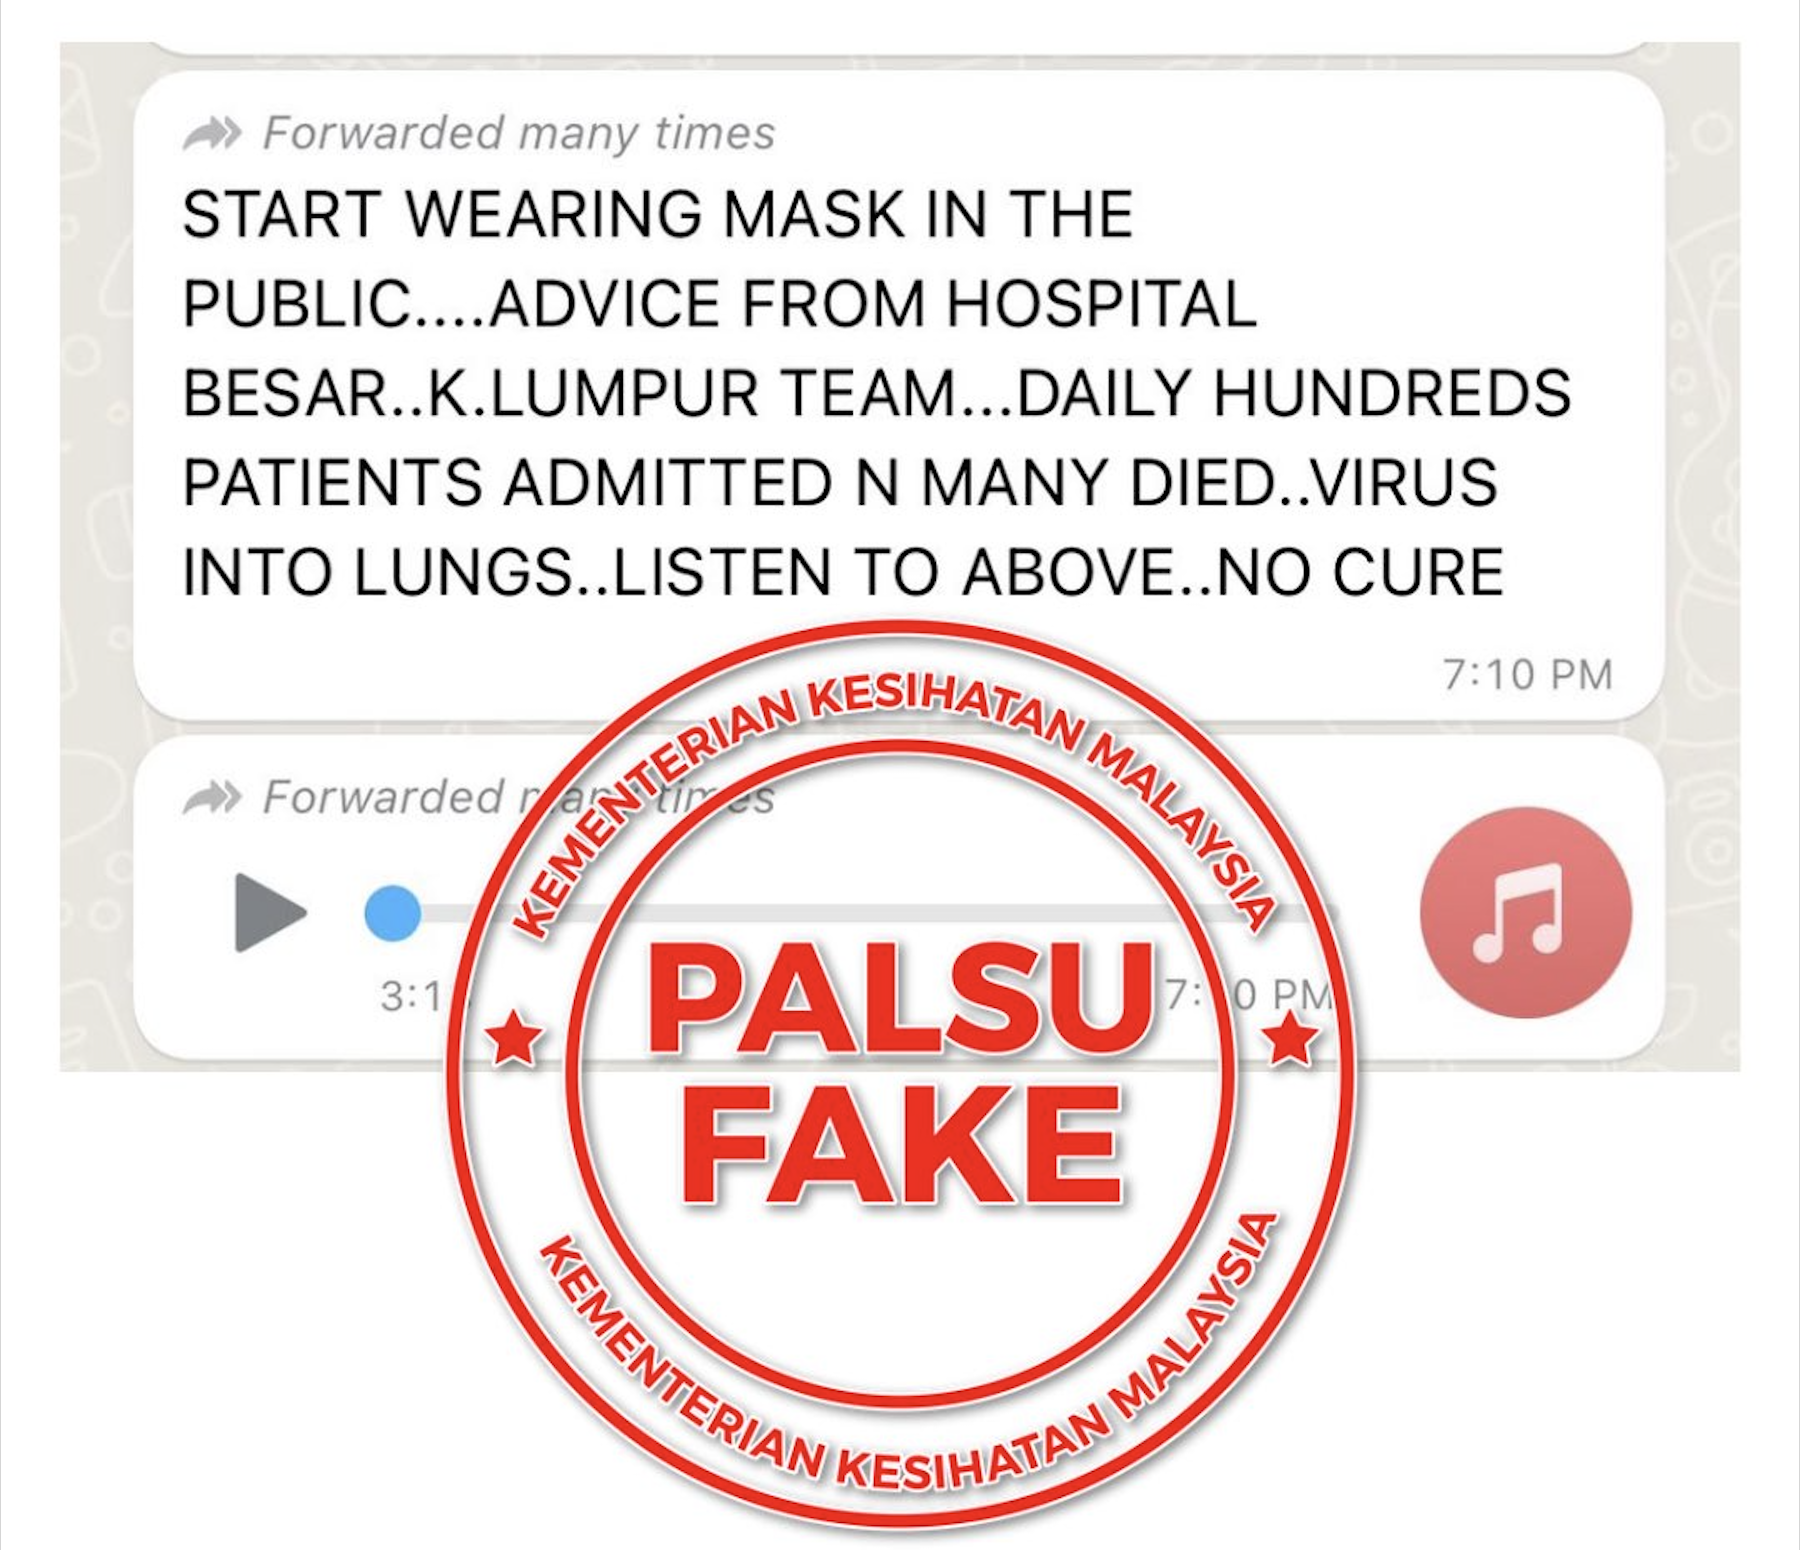 Fake news: MoH debunks viral message claiming full hospitals and rising Covid-19 deaths